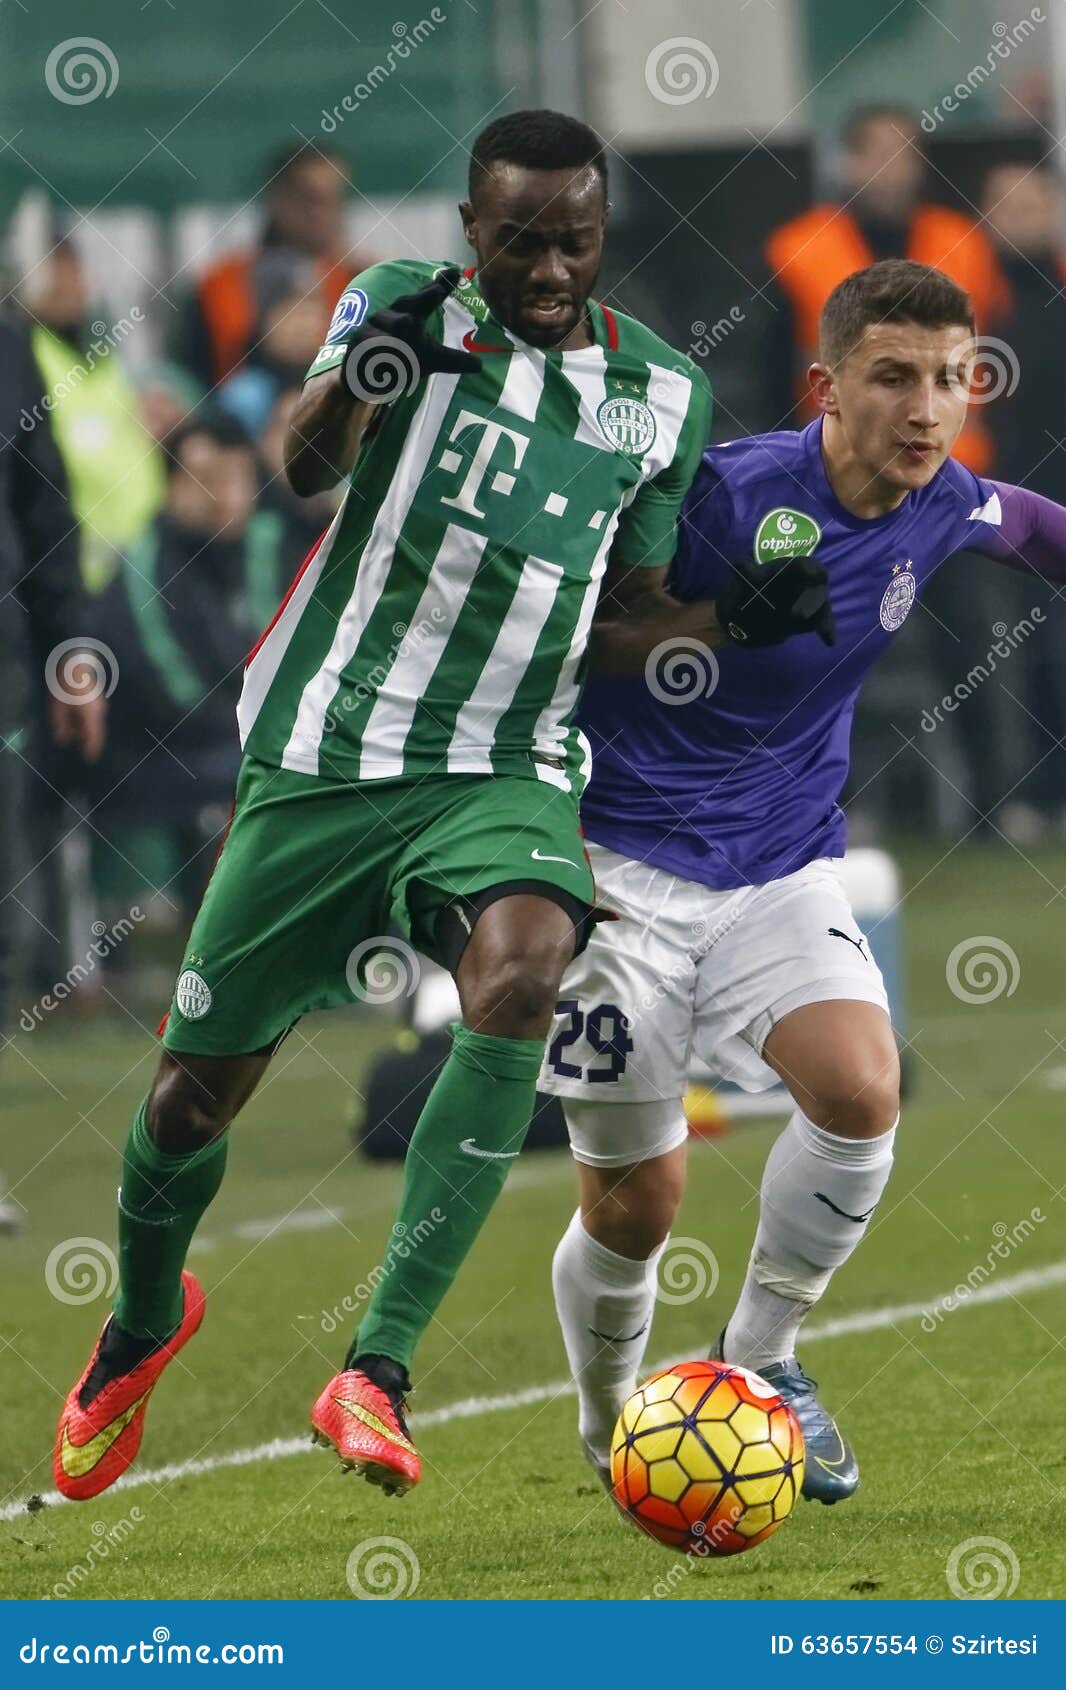 Ferencvaros - Ujpest OTP Bank League Football Match Editorial Stock Image - Image of league ...